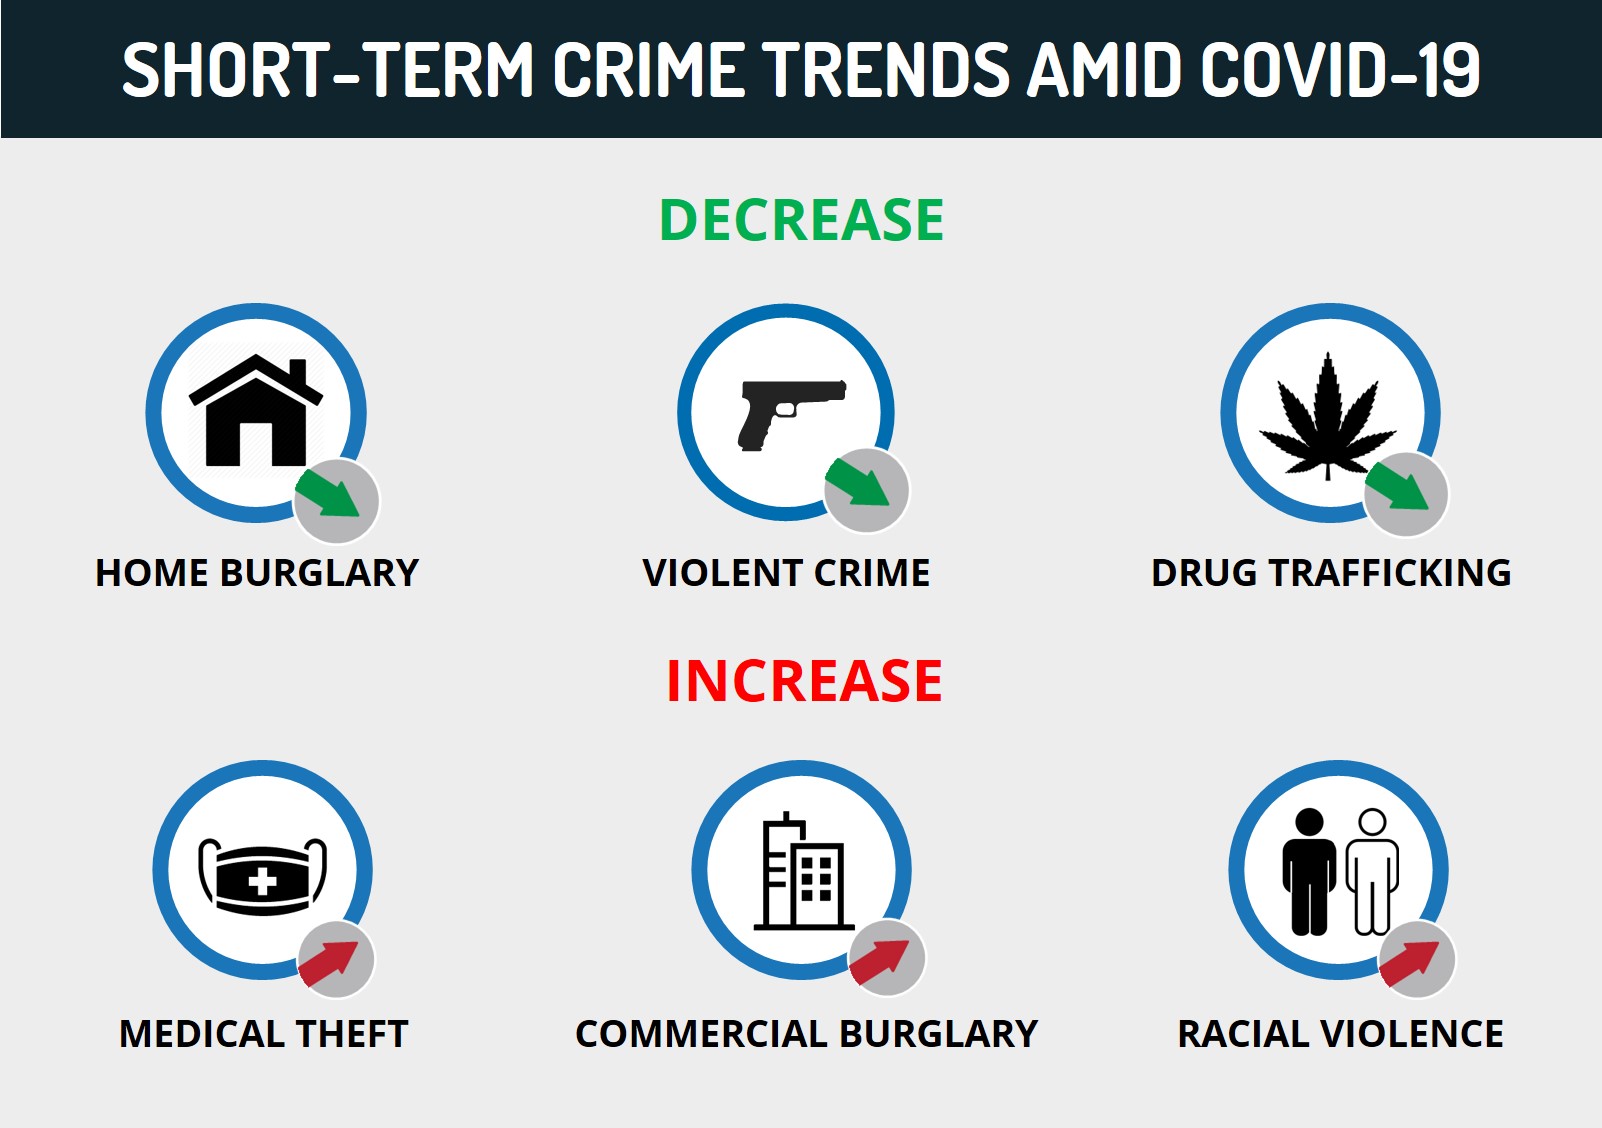 SHORT-TERM CRIME TRENDS ANID COVID-19